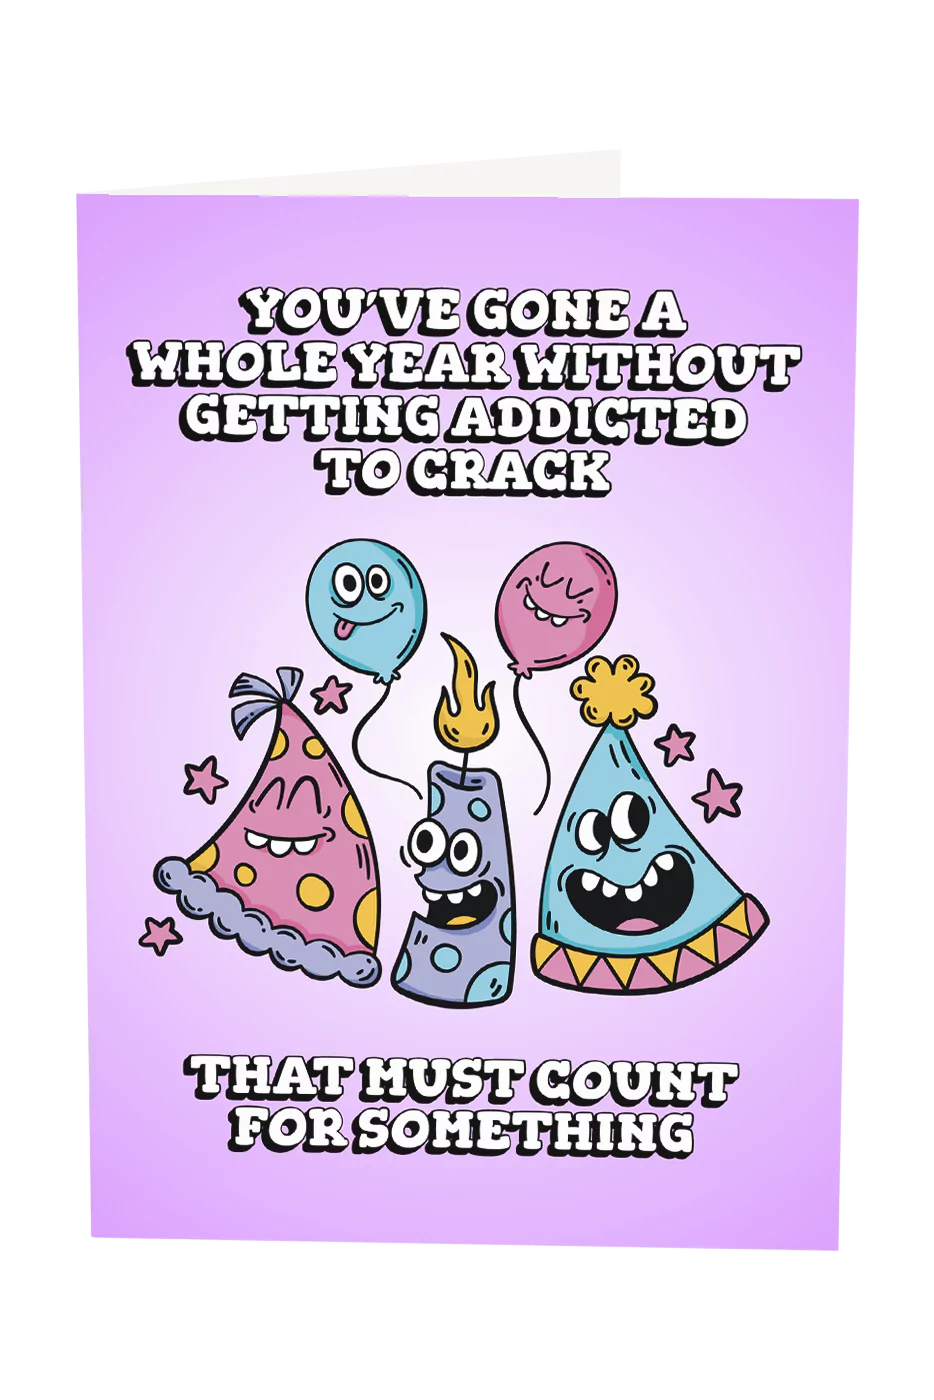 You've Gone A Whole Year With Getting Addicted To Crack